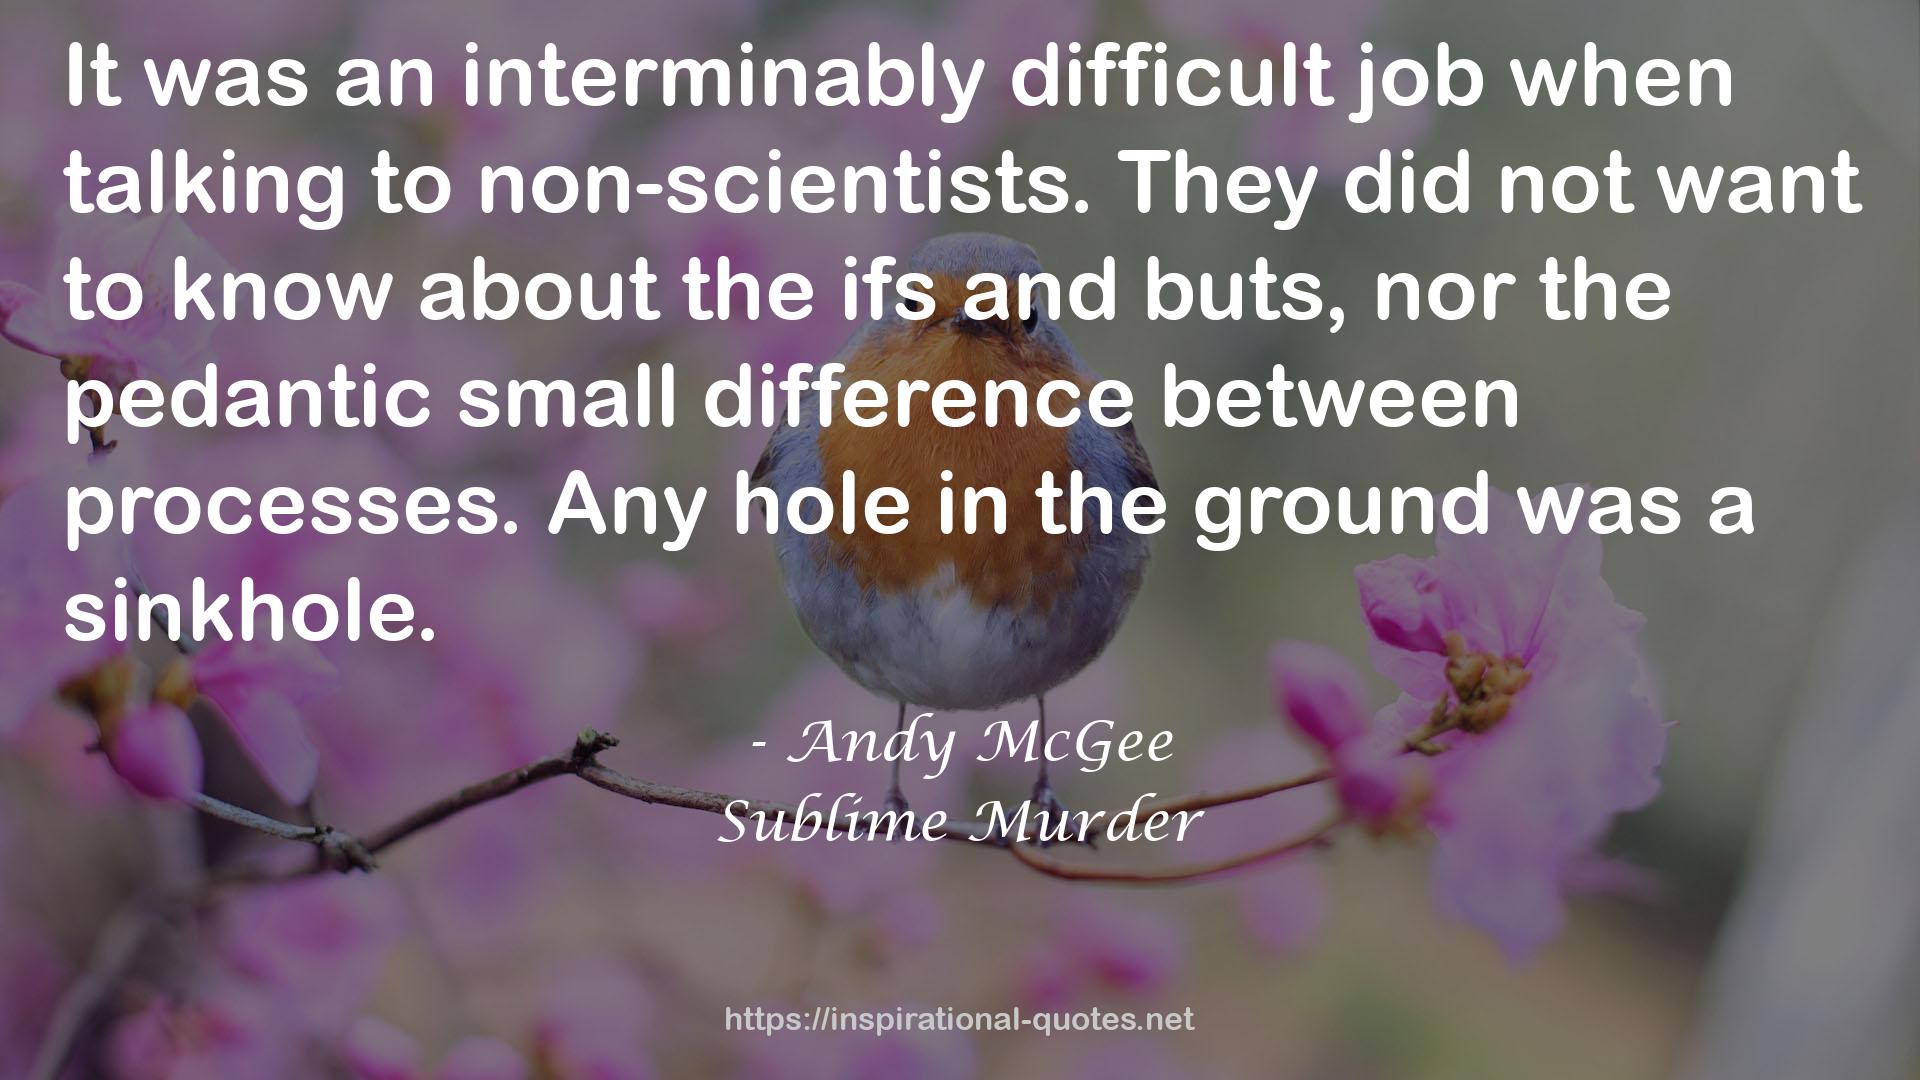 Andy McGee QUOTES